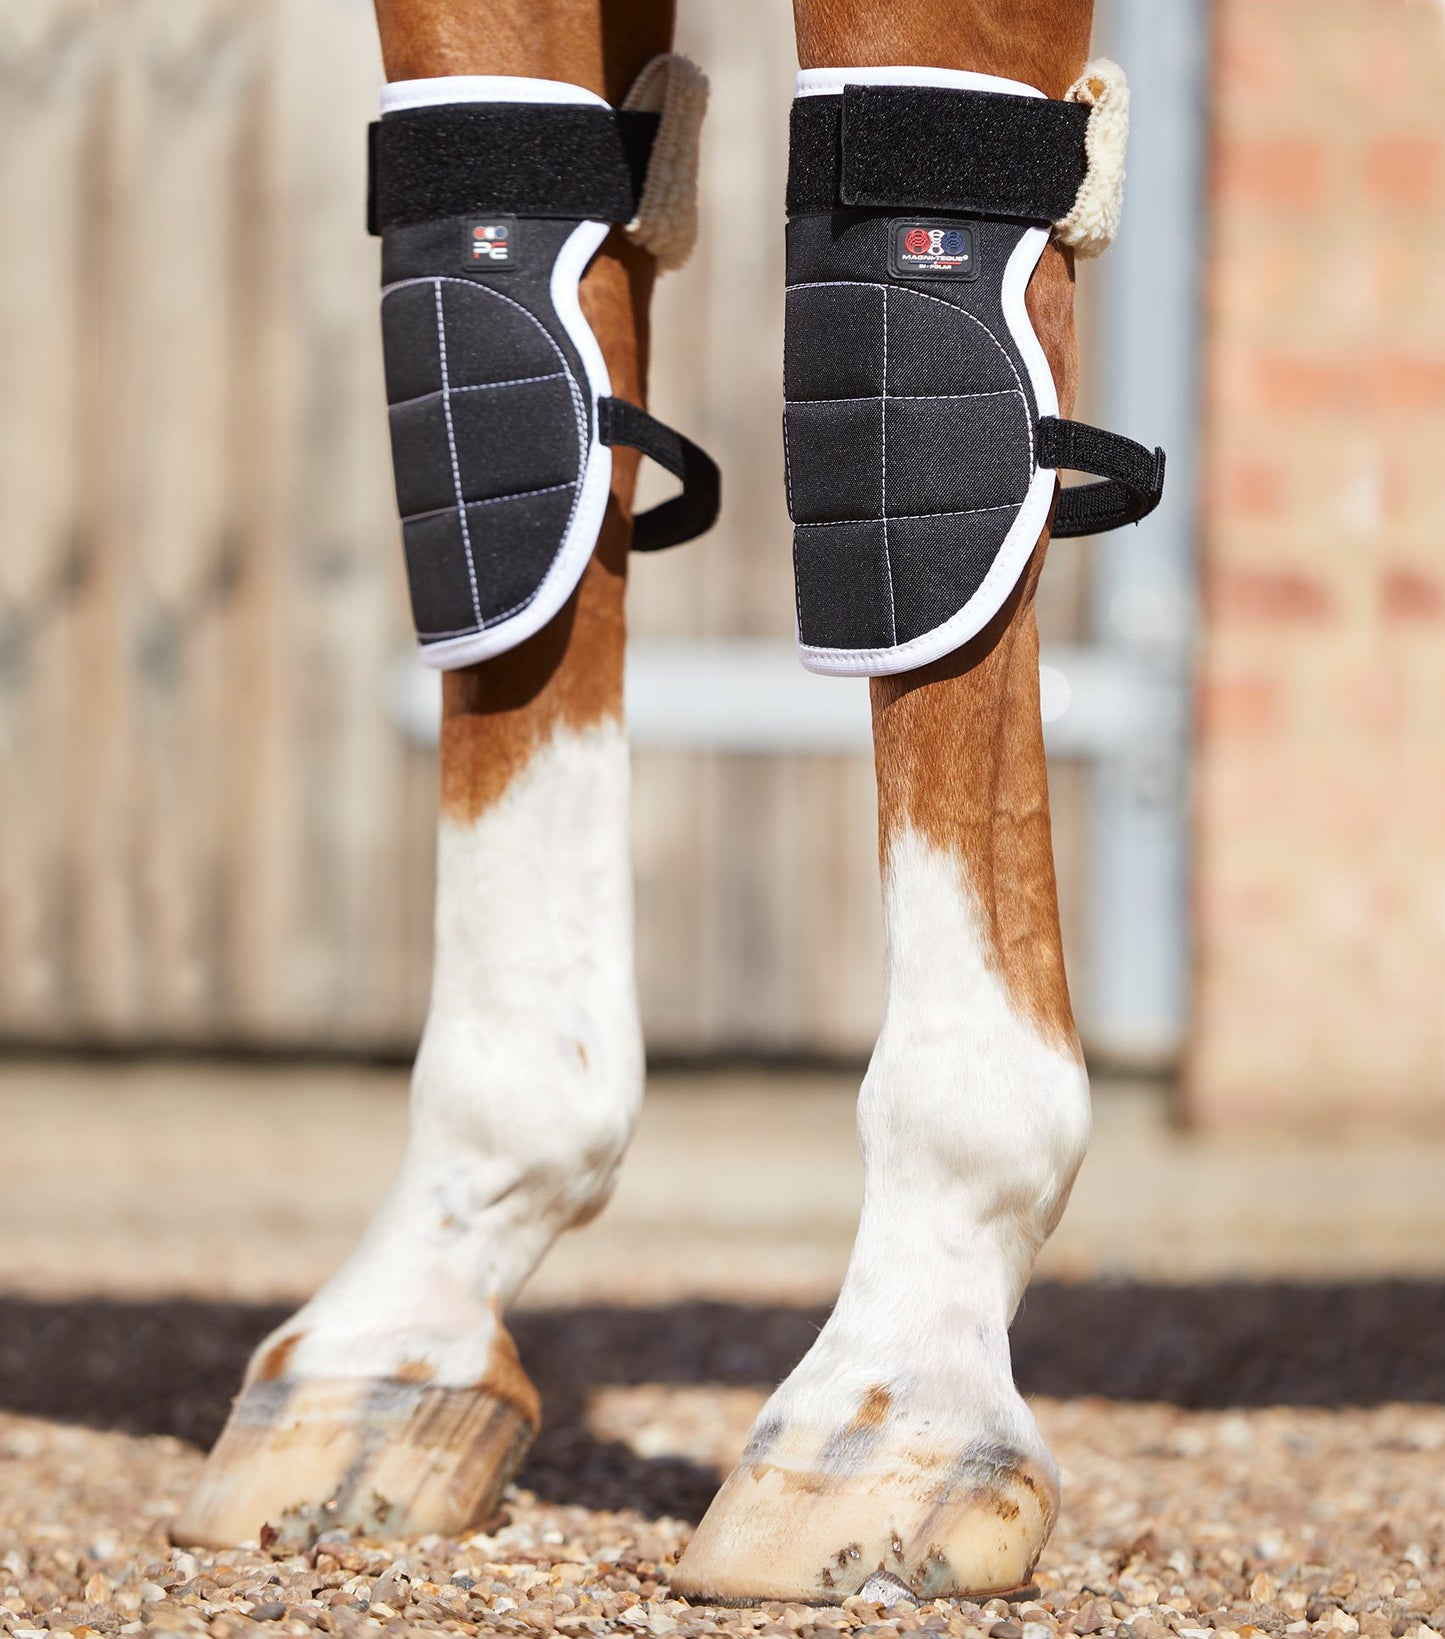 Magni-Teque Magnetic Knee Boots